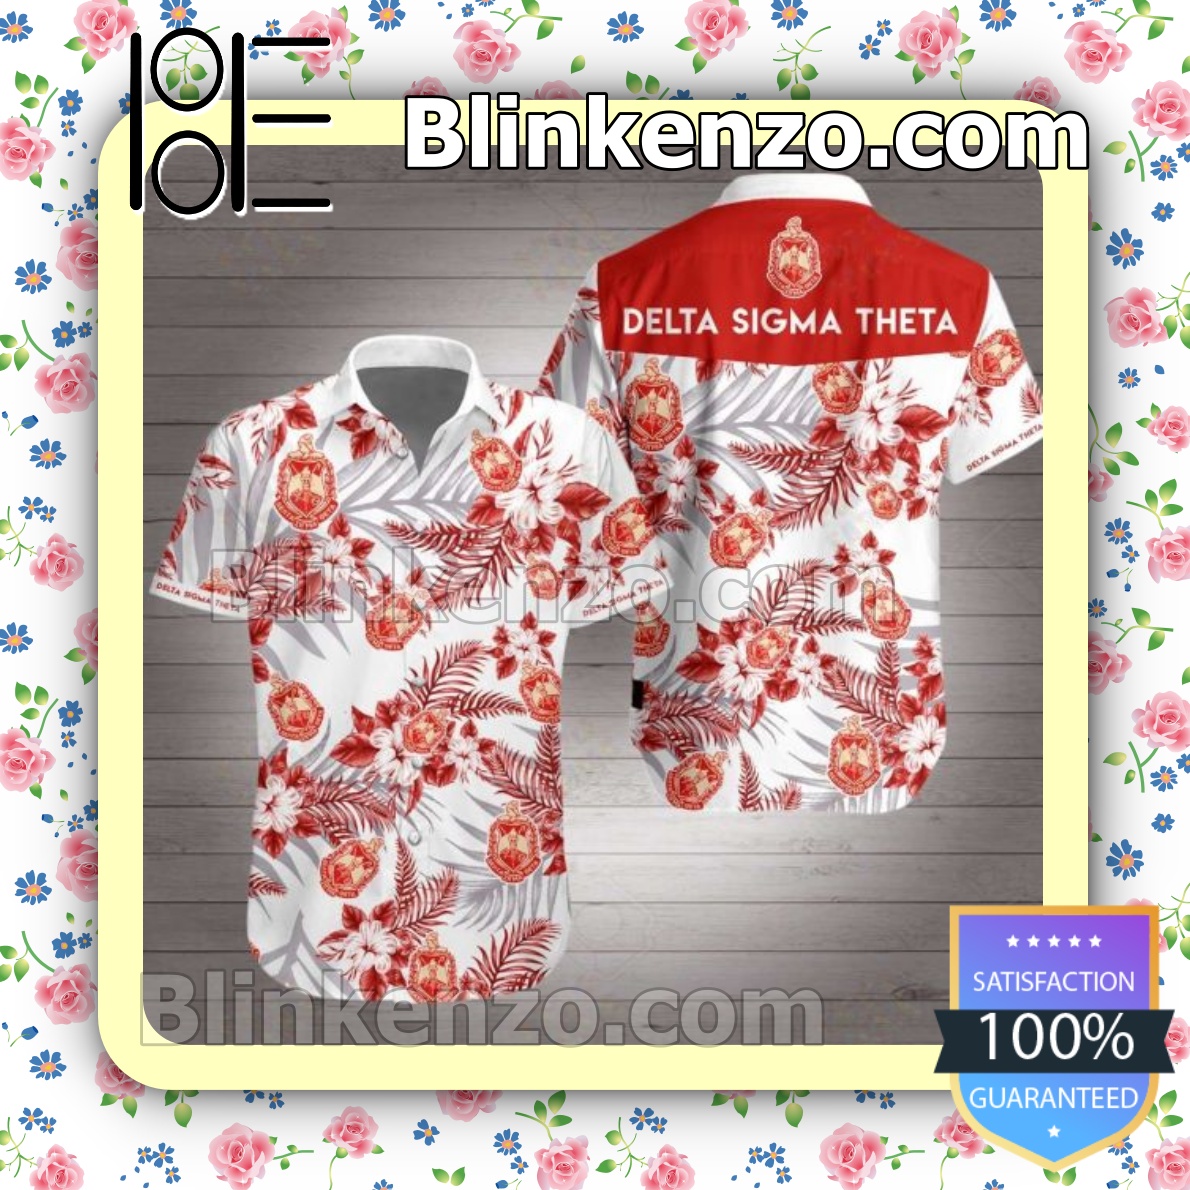 Sale Off Delta Sigma Theta Red Tropical Floral White Summer Shirts